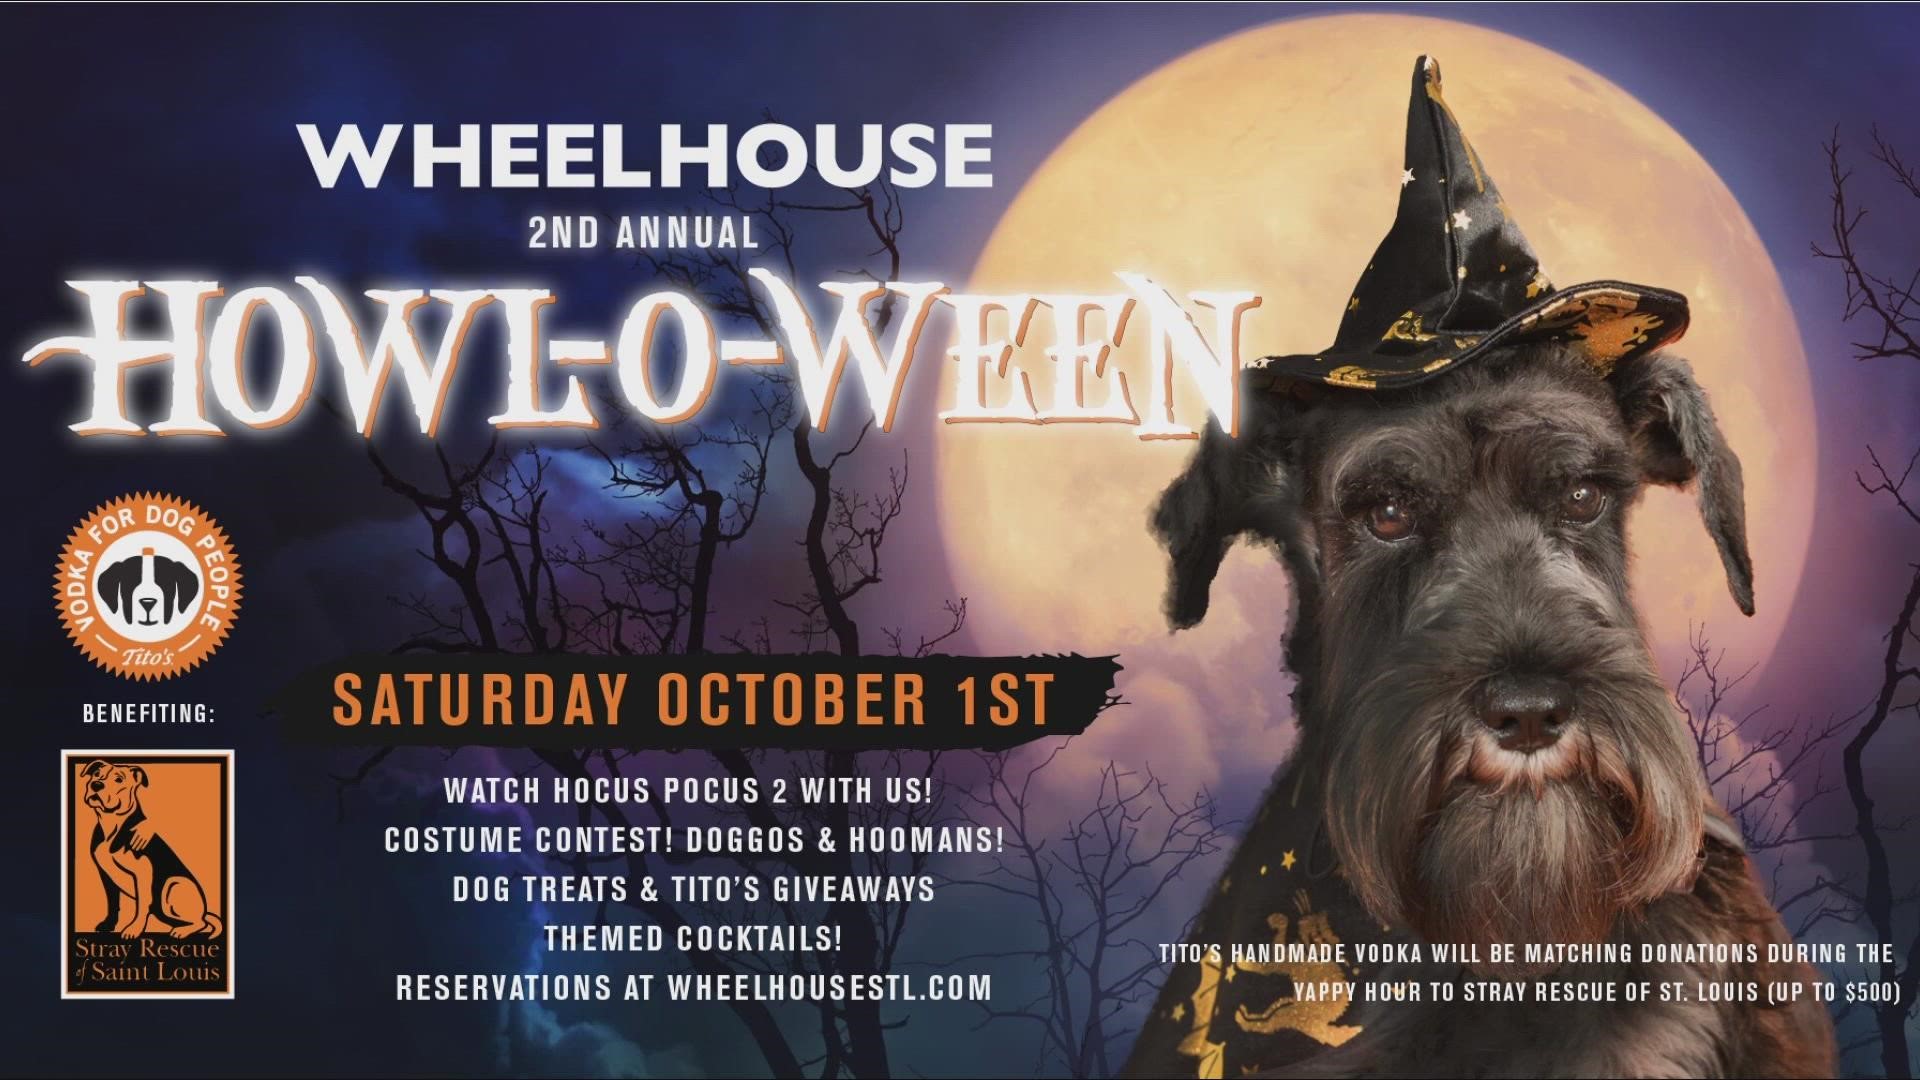 Stray Rescue is at Wheelhouse Saturday from 10 a.m. to 5 p.m. for some Howl-o-ween fun! You can even watch Hocus Pocus 2.